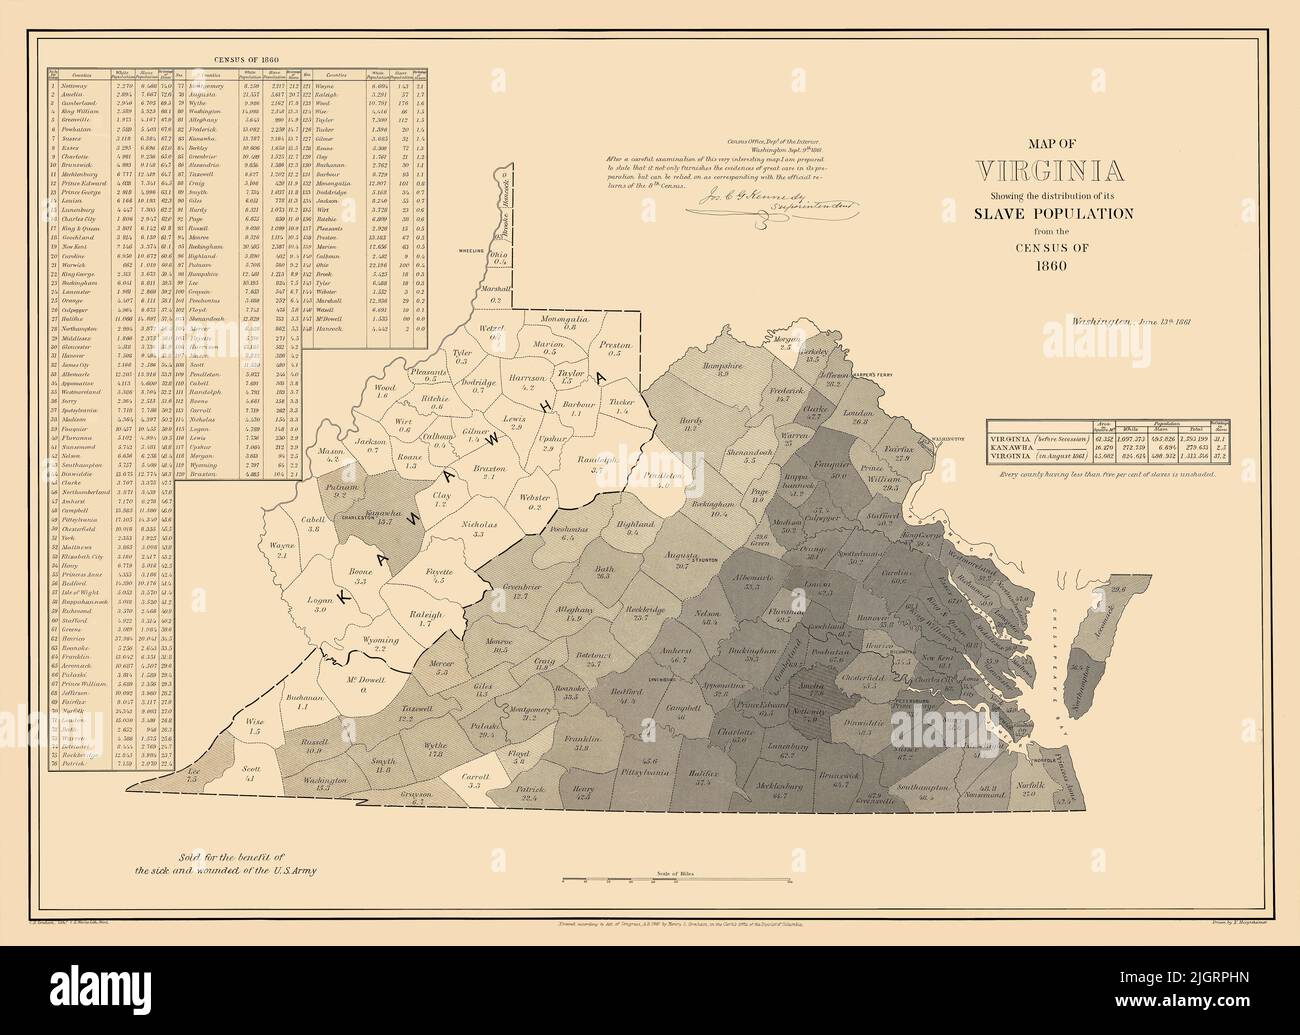 Restored, enhanced reproduction of an 1861 antique map. Original title: Map of Virginia showing the distribution of its slave population from the census of 1860. Shows the state divided into counties with the percentage of slaves in each county. West Virginia is labeled 'Kanawha,' the name of the  proposed state at the time. Stock Photo